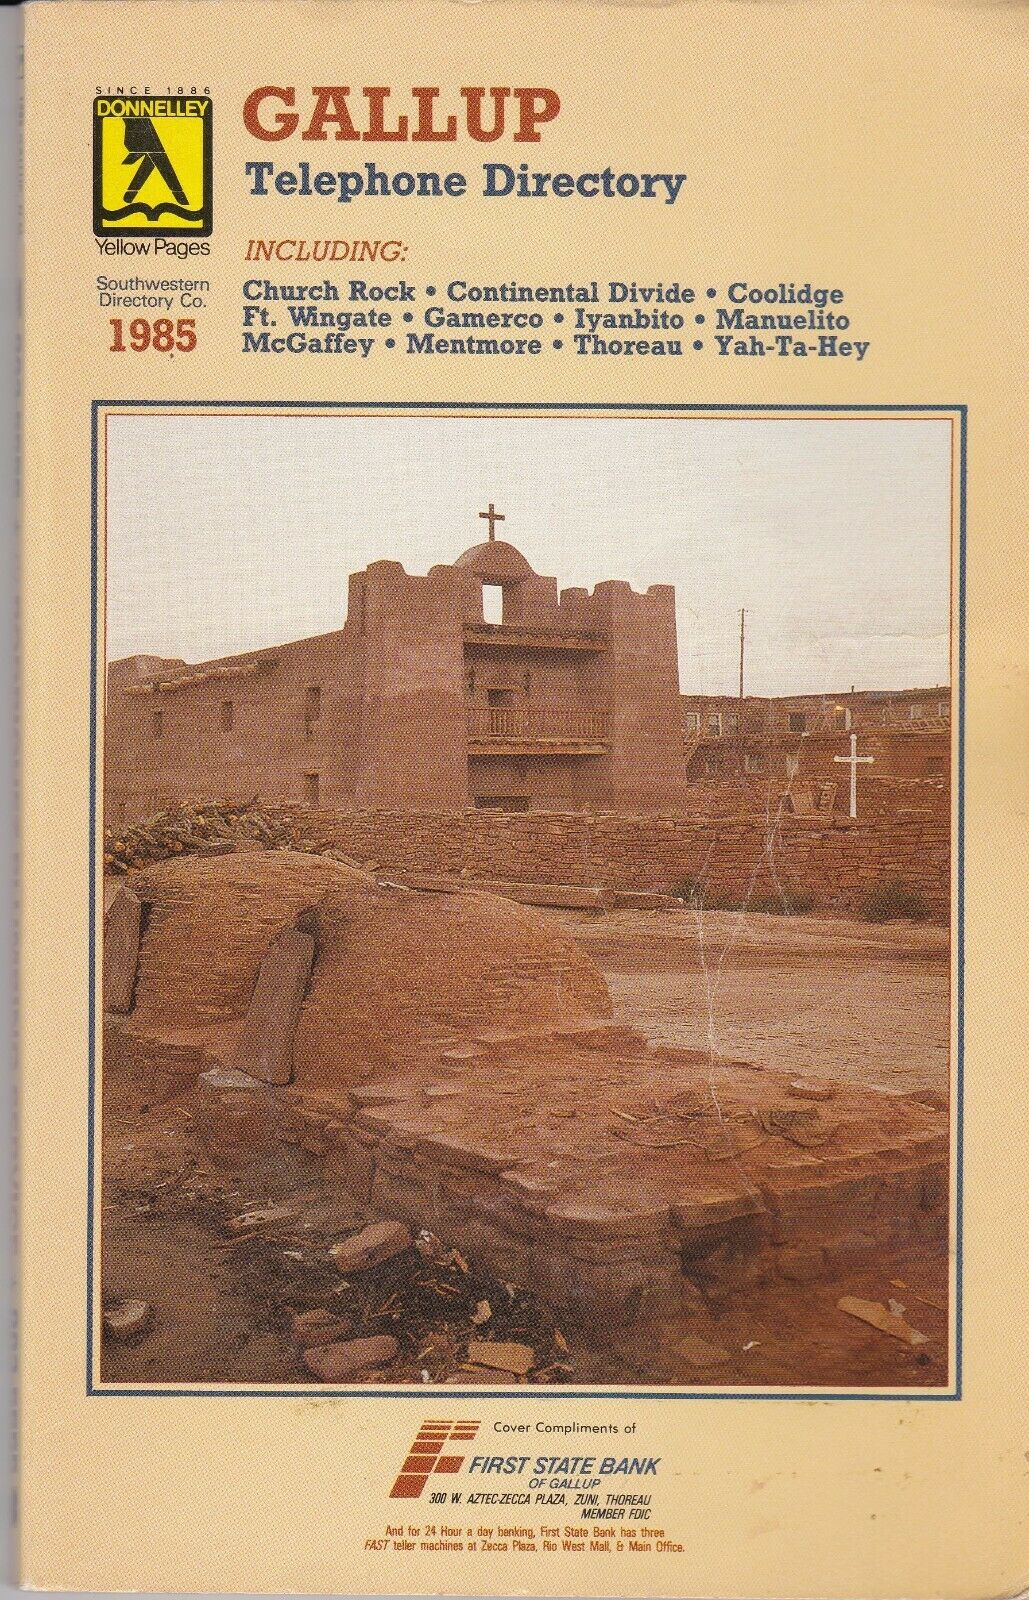 1985 - Gallup New Mexico Telephone Directory / Book - Southwestern Directory Co.